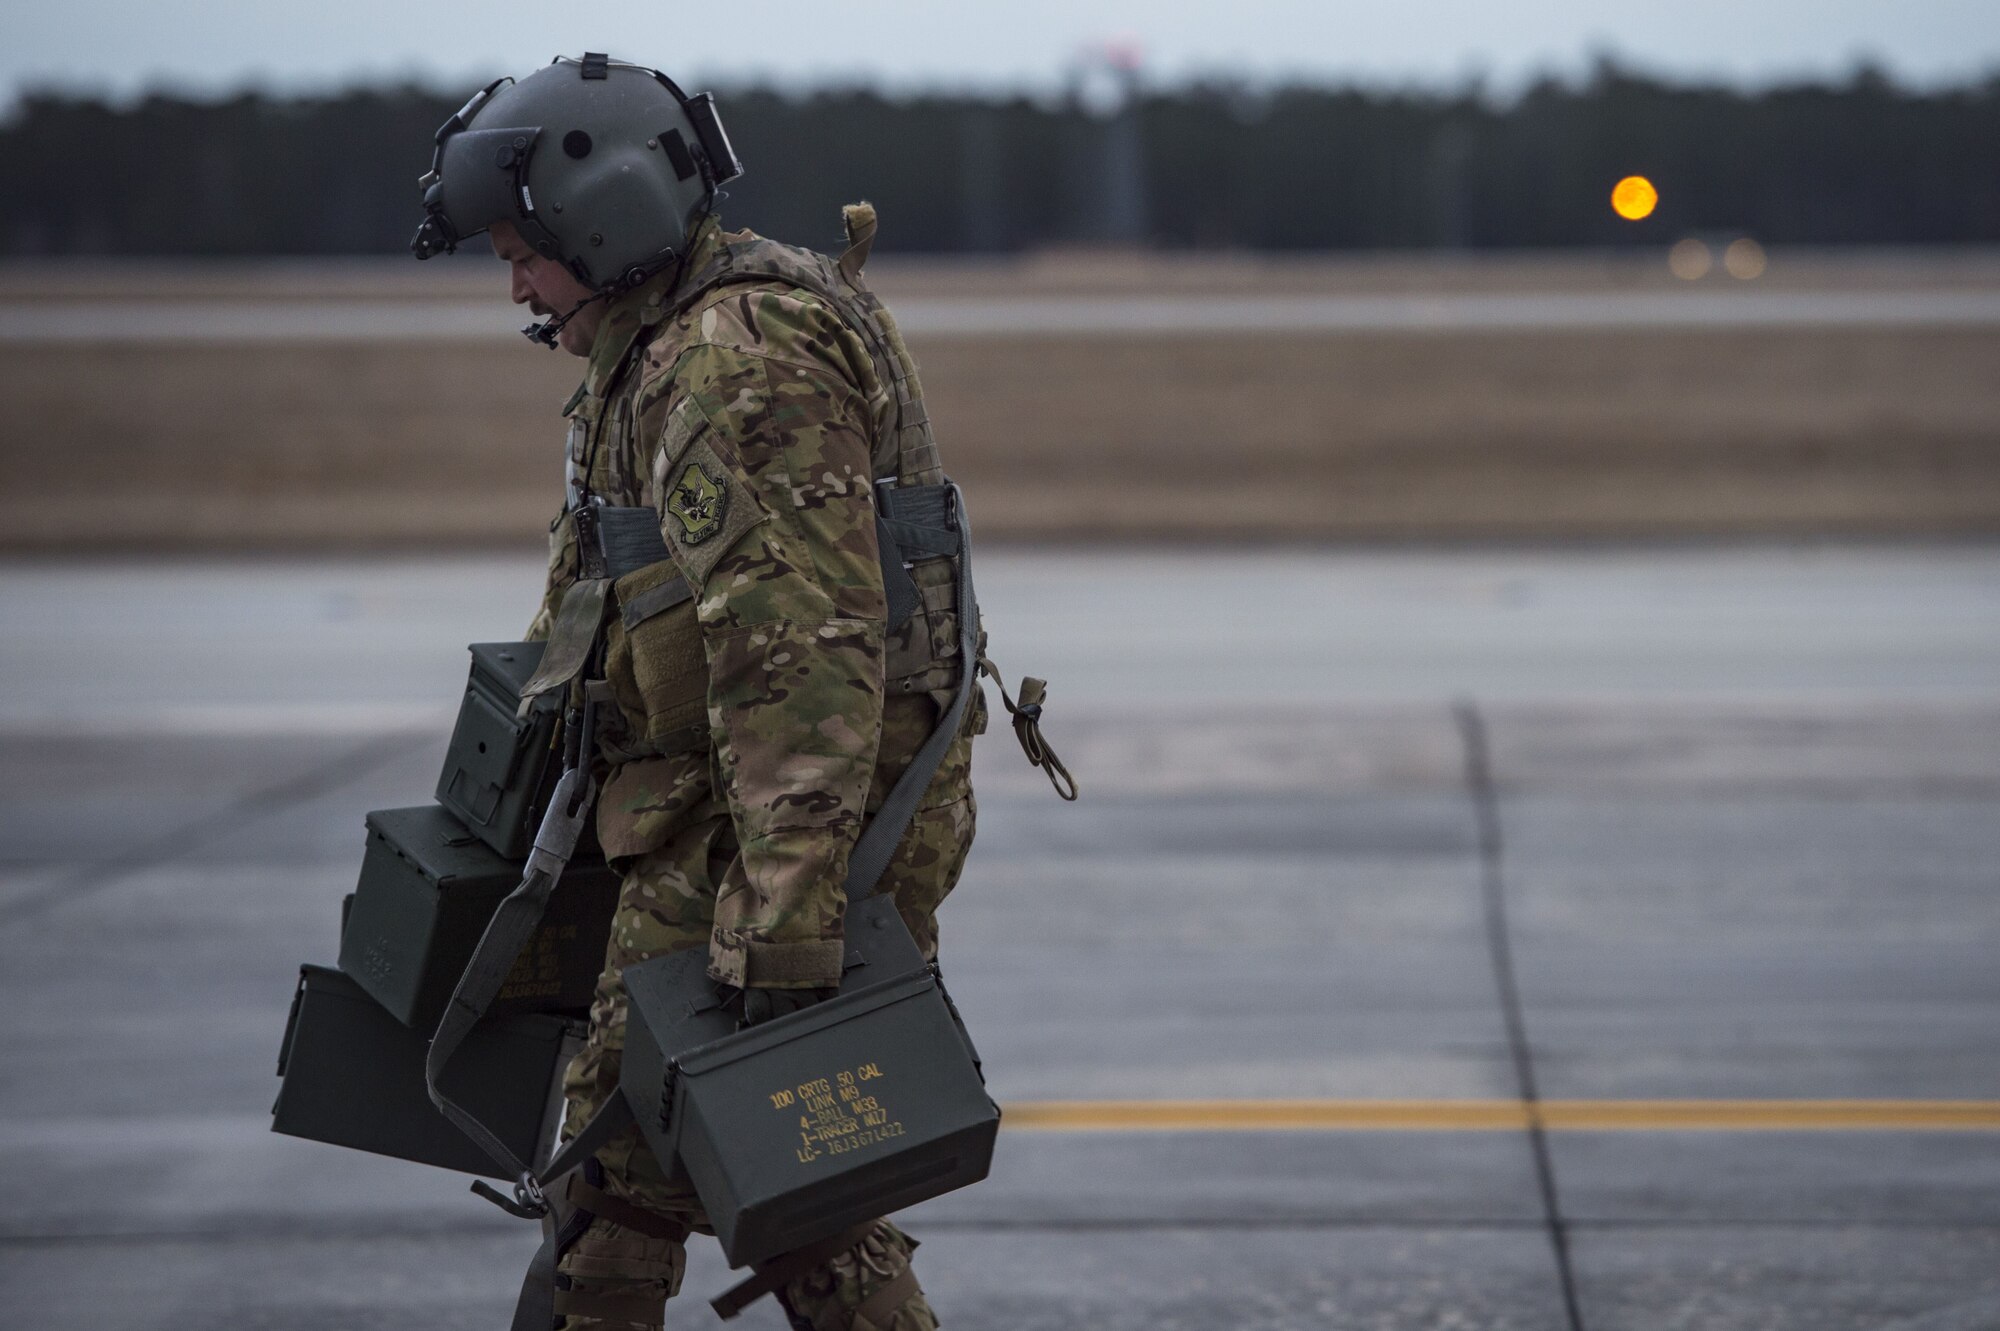 Senior Airman Joseph Lombardi, 41st Rescue Squadron (RQS) special missions aviator, carries empty ammunition cans, Jan. 22, 2018, at Moody Air Force Base, Ga.The 41st RQS is responsible for maintaining combat-ready personnel for recovery missions. To achieve this, members of the squadron constantly train on day and nighttime operations to maintain proficiency. (U.S. Air Force photo by Senior Airman Janiqua P. Robinson)